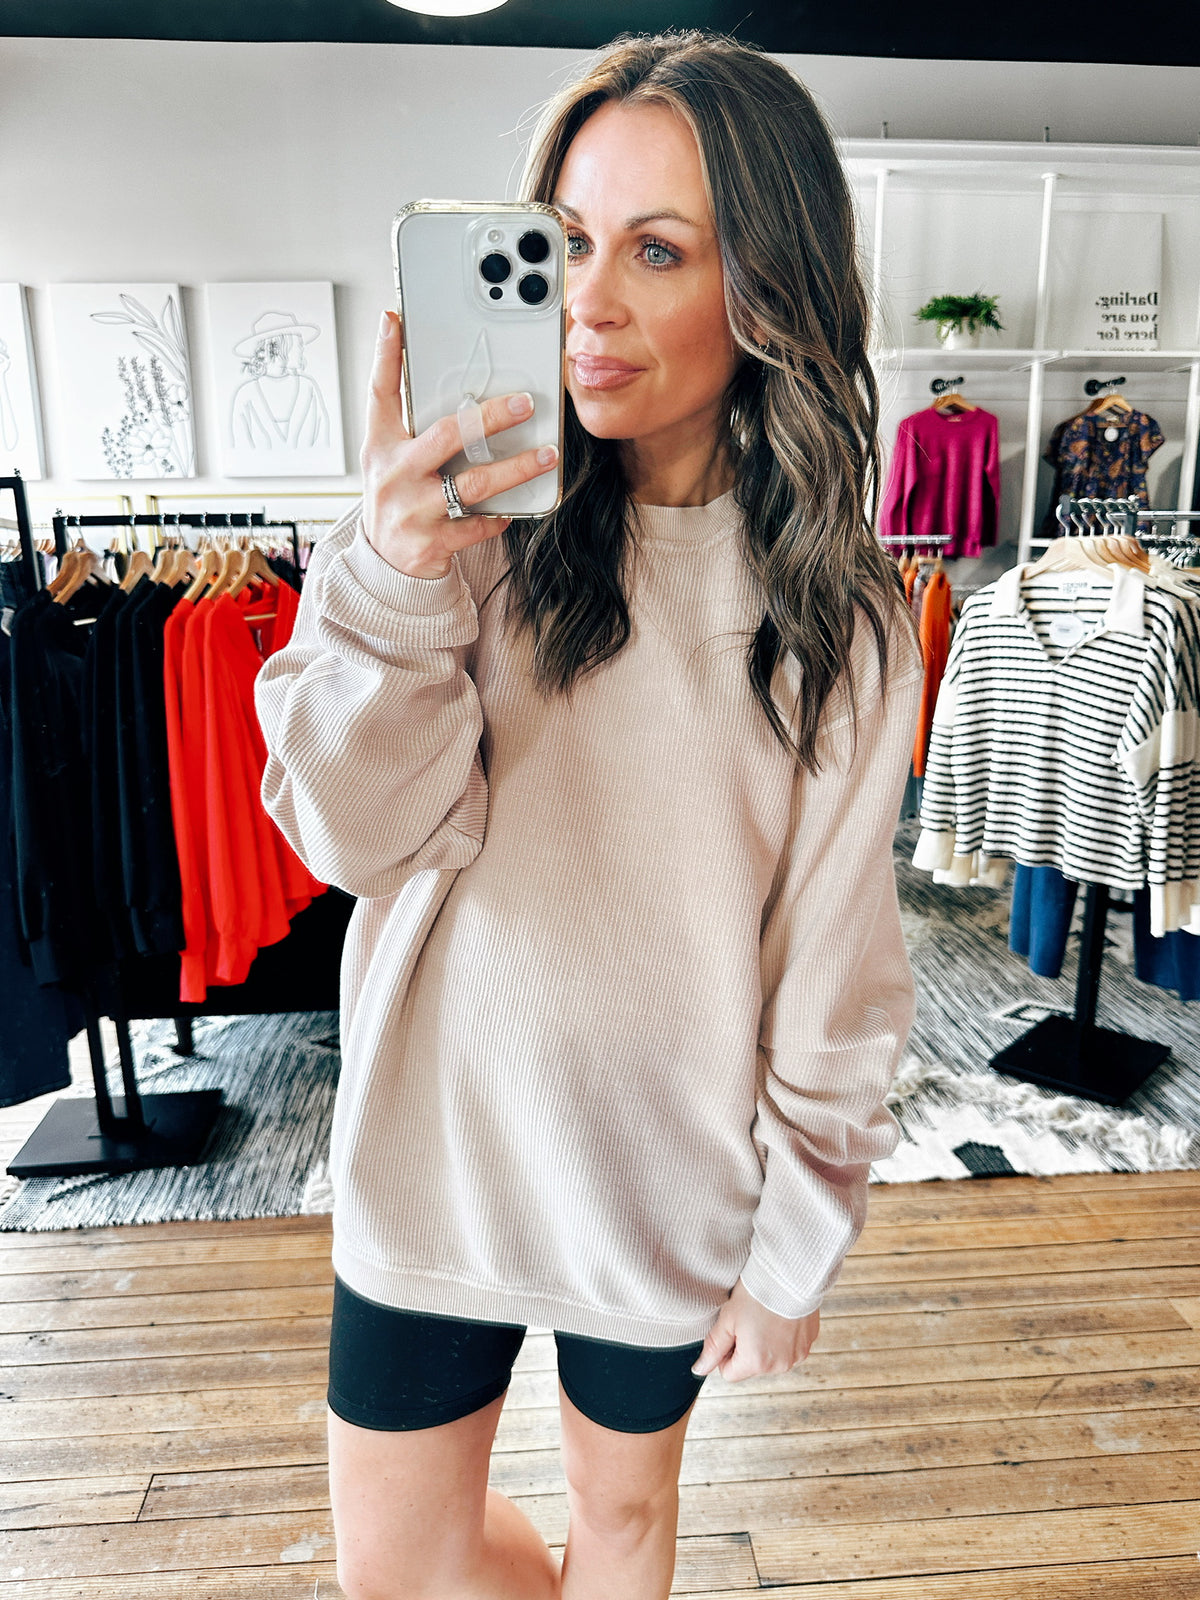 Essential Luxe Corded Sweatshirt- 7 Colors-sweaterLuxe Corded Sweatshirt | VerClare Boutique | Chenoa, IL-Luxe Corded Sweatshirt! Features relaxed style and comfy fit! Available in sizes S, M, L, XL in Blue, Hummus, Ivory, Mint, Mushroom, Periwinkle, and Pink. Located in Chenoa, Illinois about 20 minutes outside of Bloomington & Normal, IL in McLean County. Free Shipping on eligible Orders. Shop Pay Accepted.-VerClare Boutique